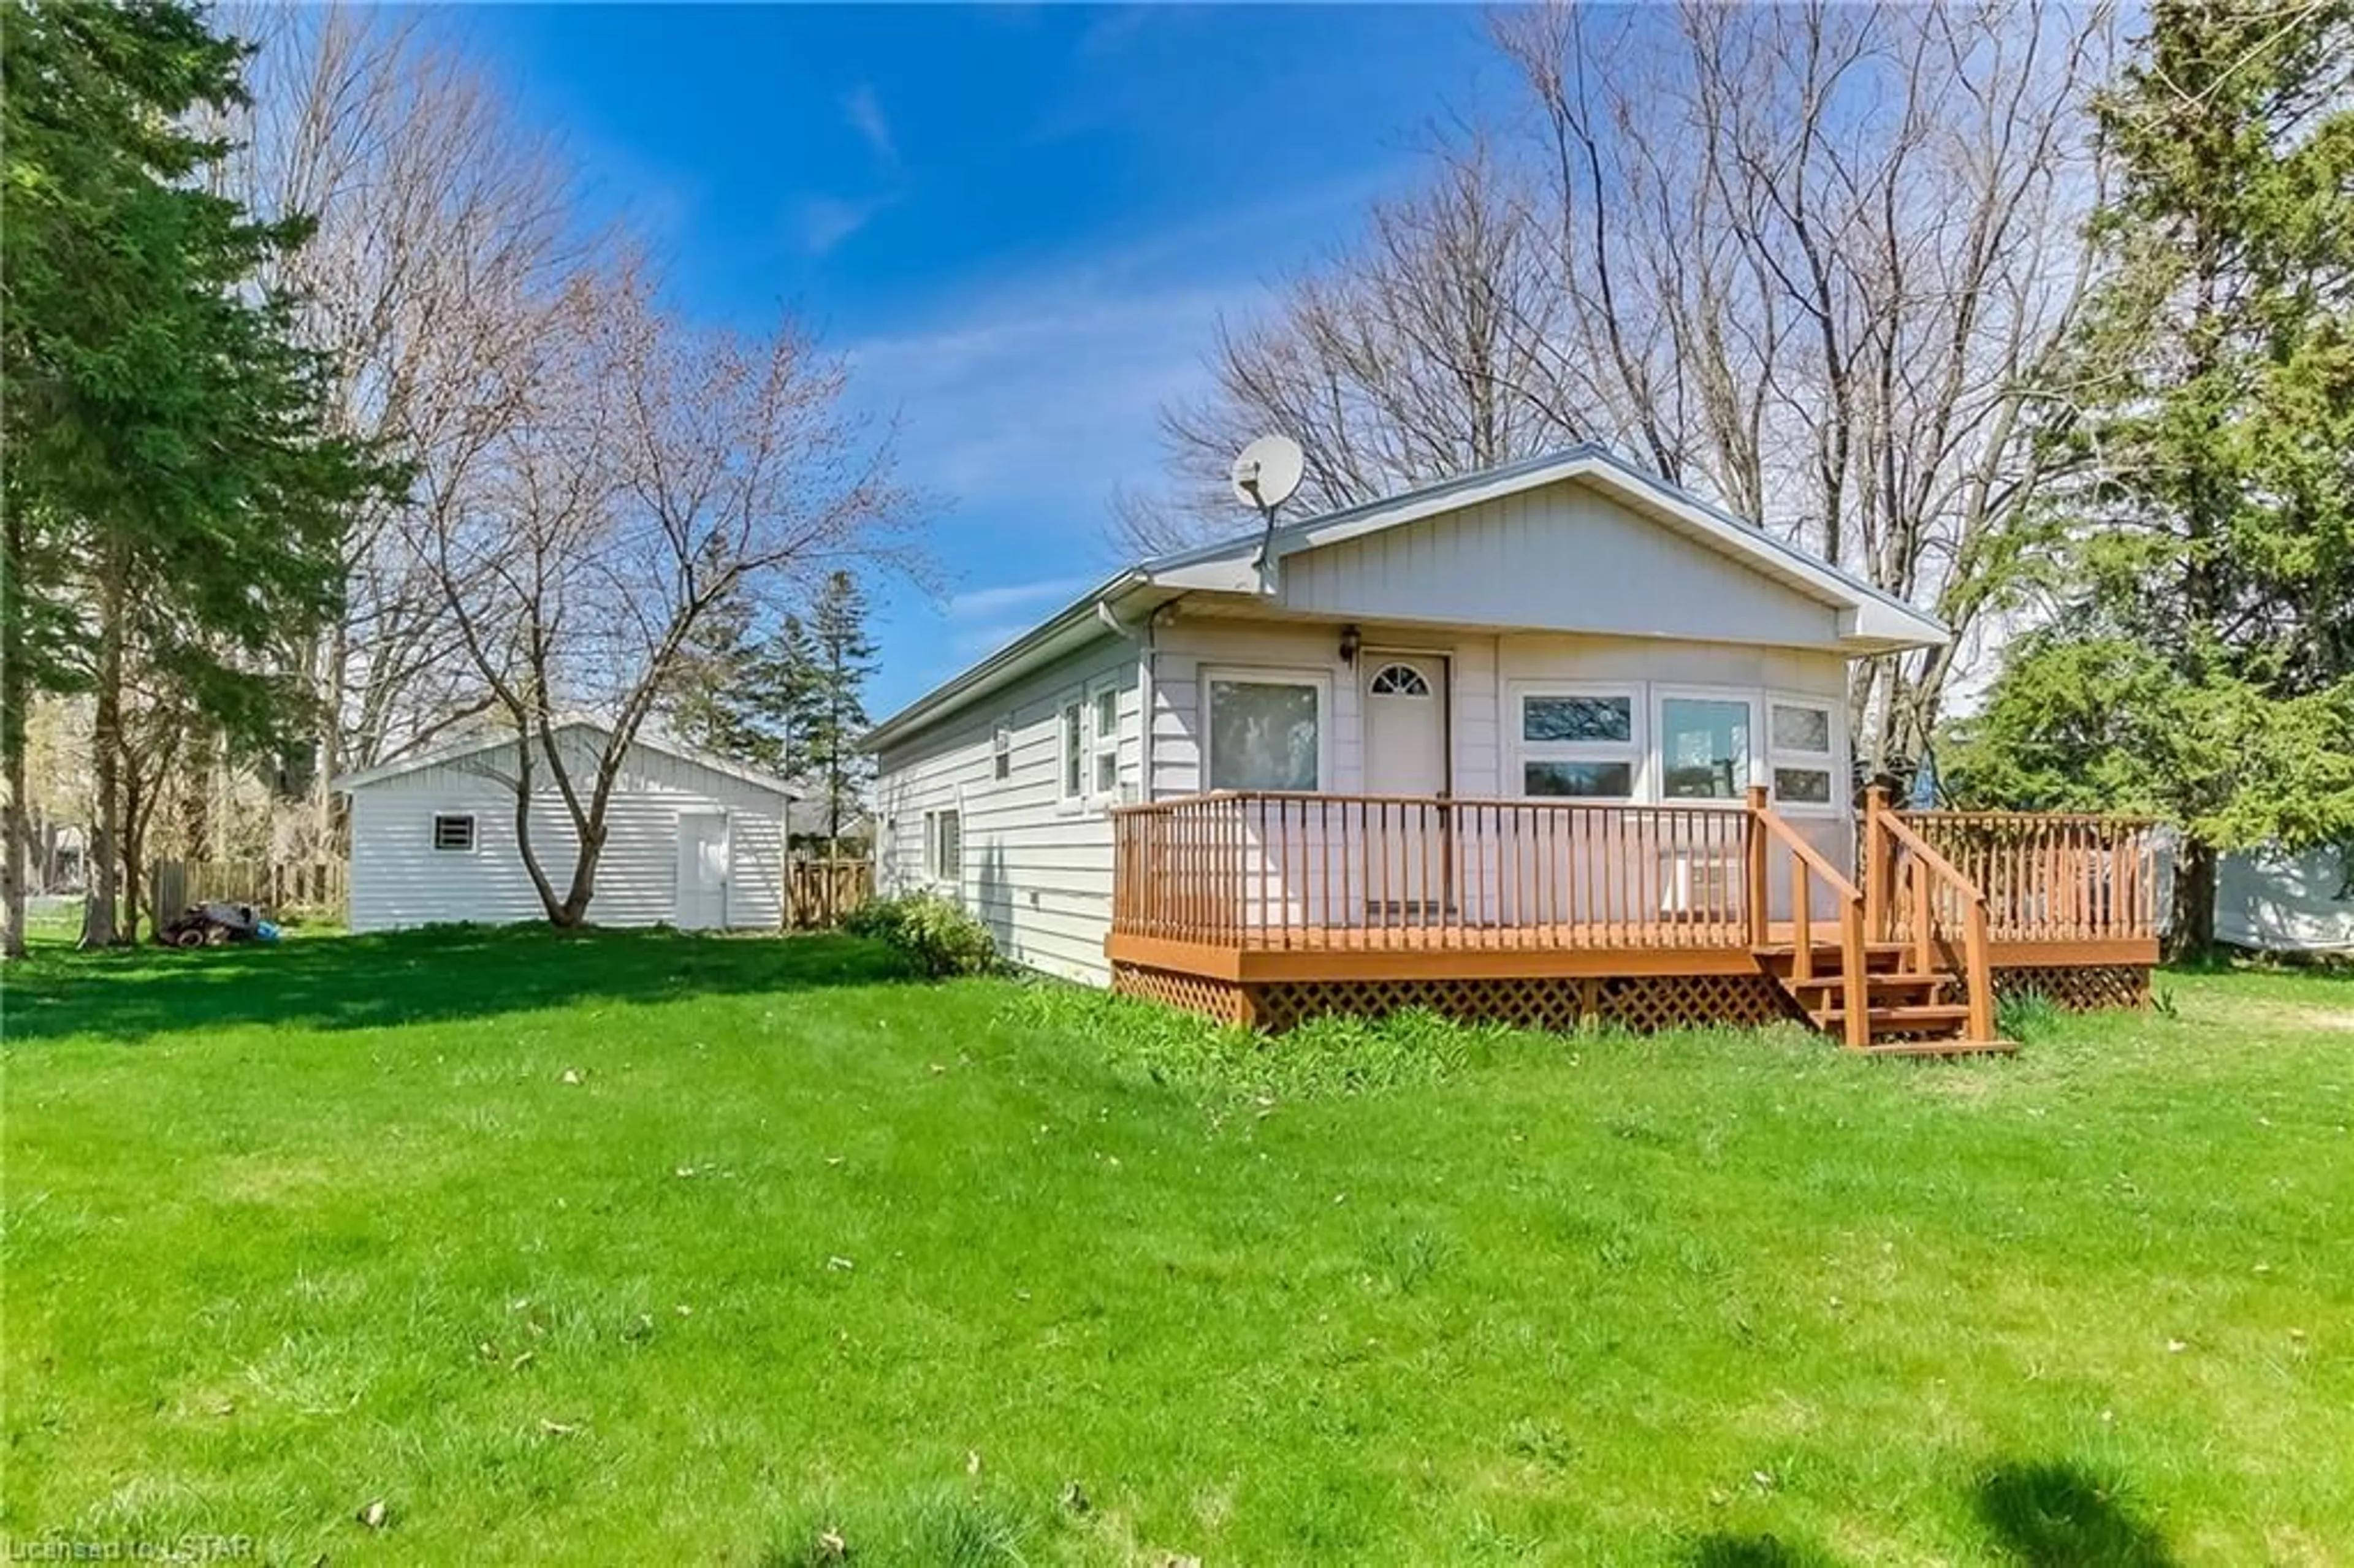 Fenced yard for 29770 Talbot Line, Wallacetown Ontario N0L 2M0